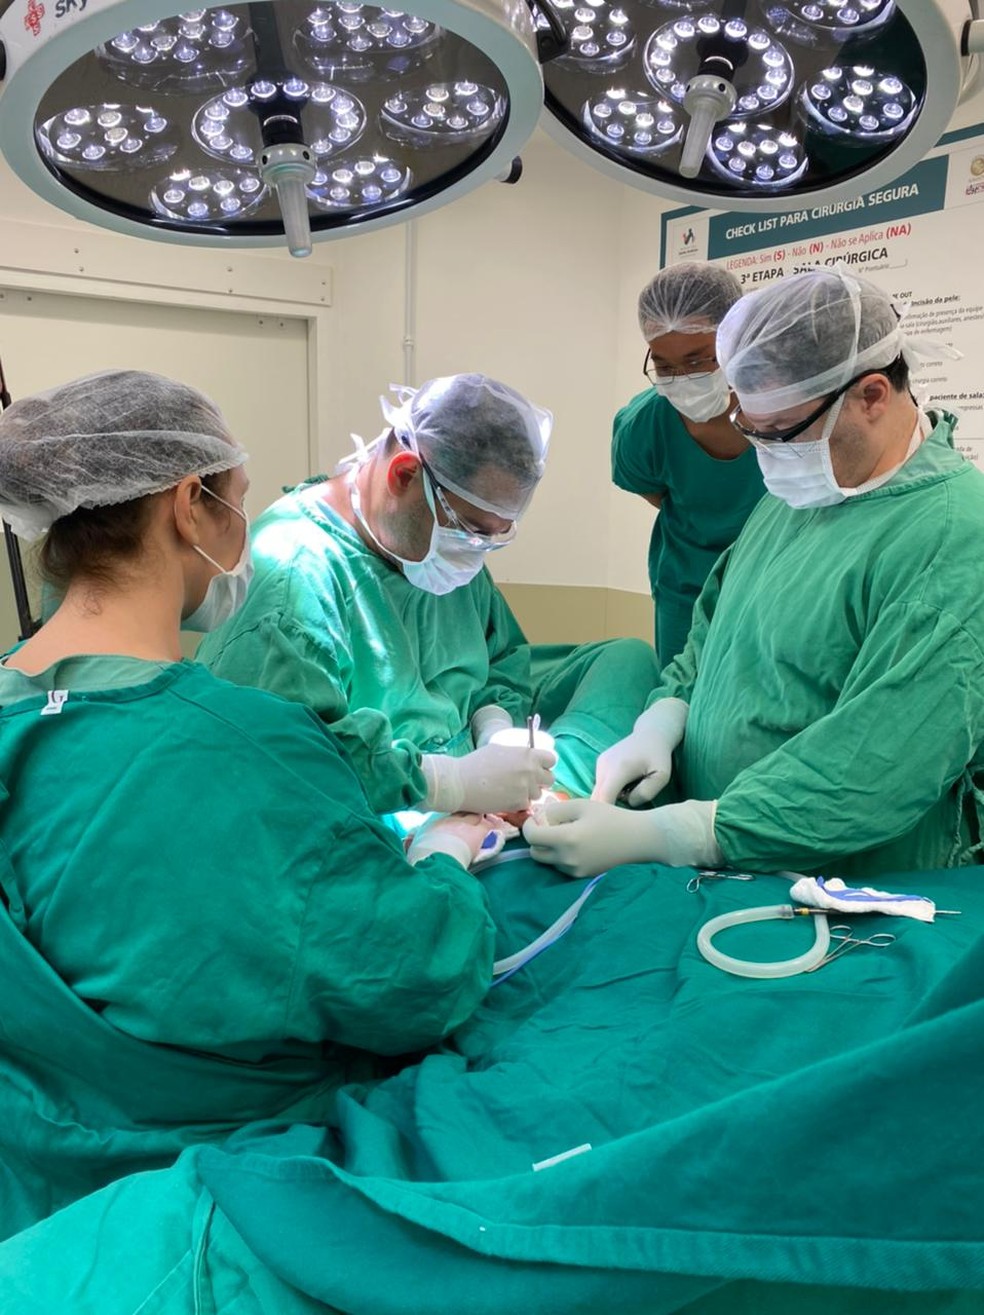 Two 19-year-old twins in Santa Catarina state achieved their dream of changing sex through surgery this week